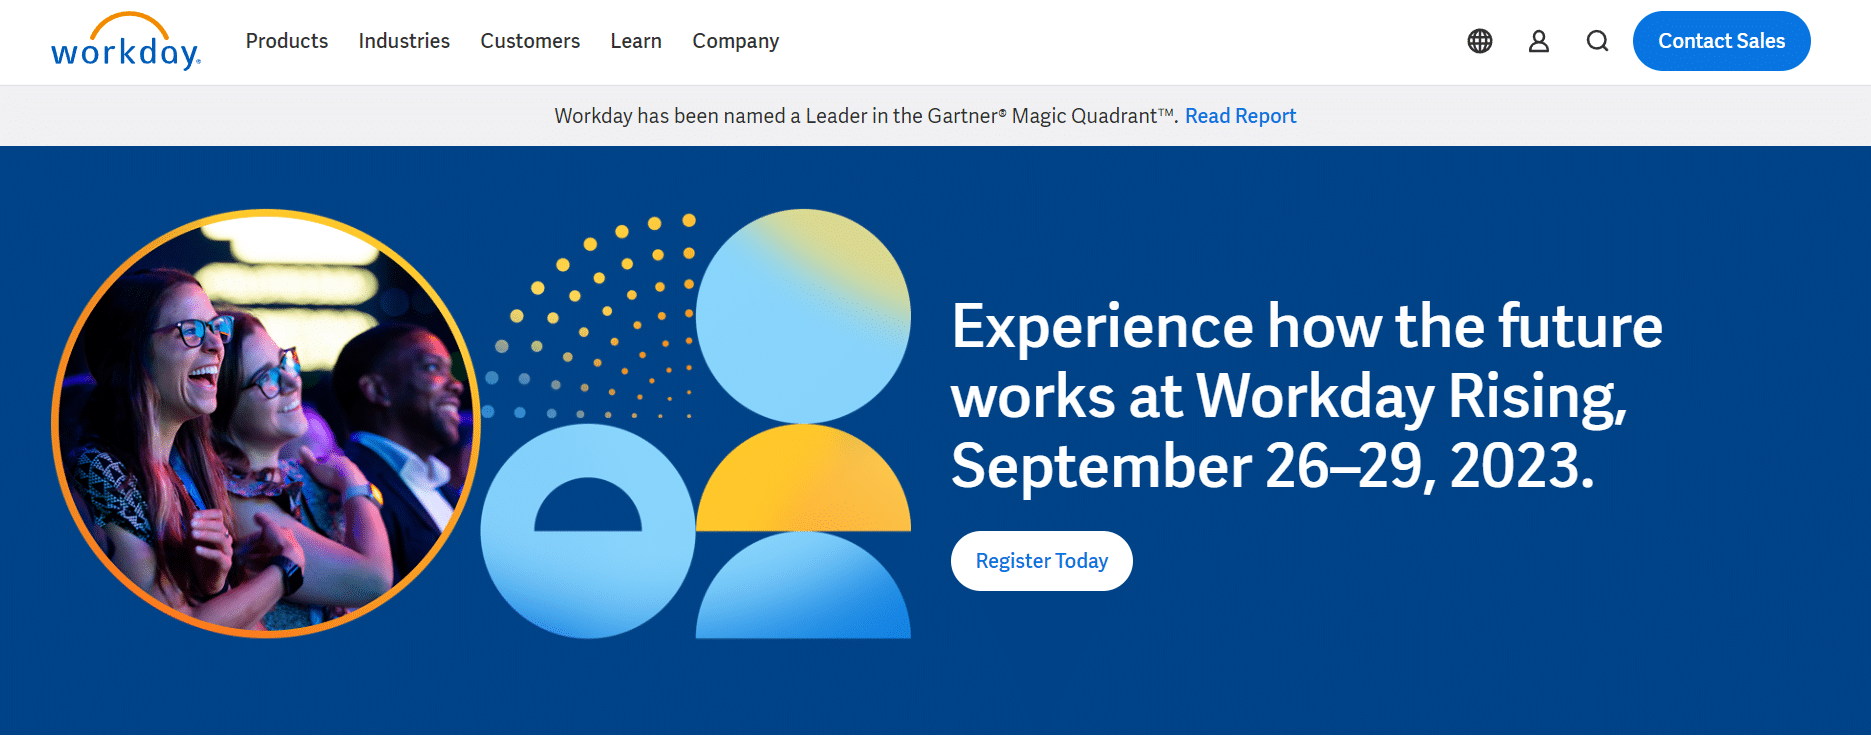 workday- HR tech